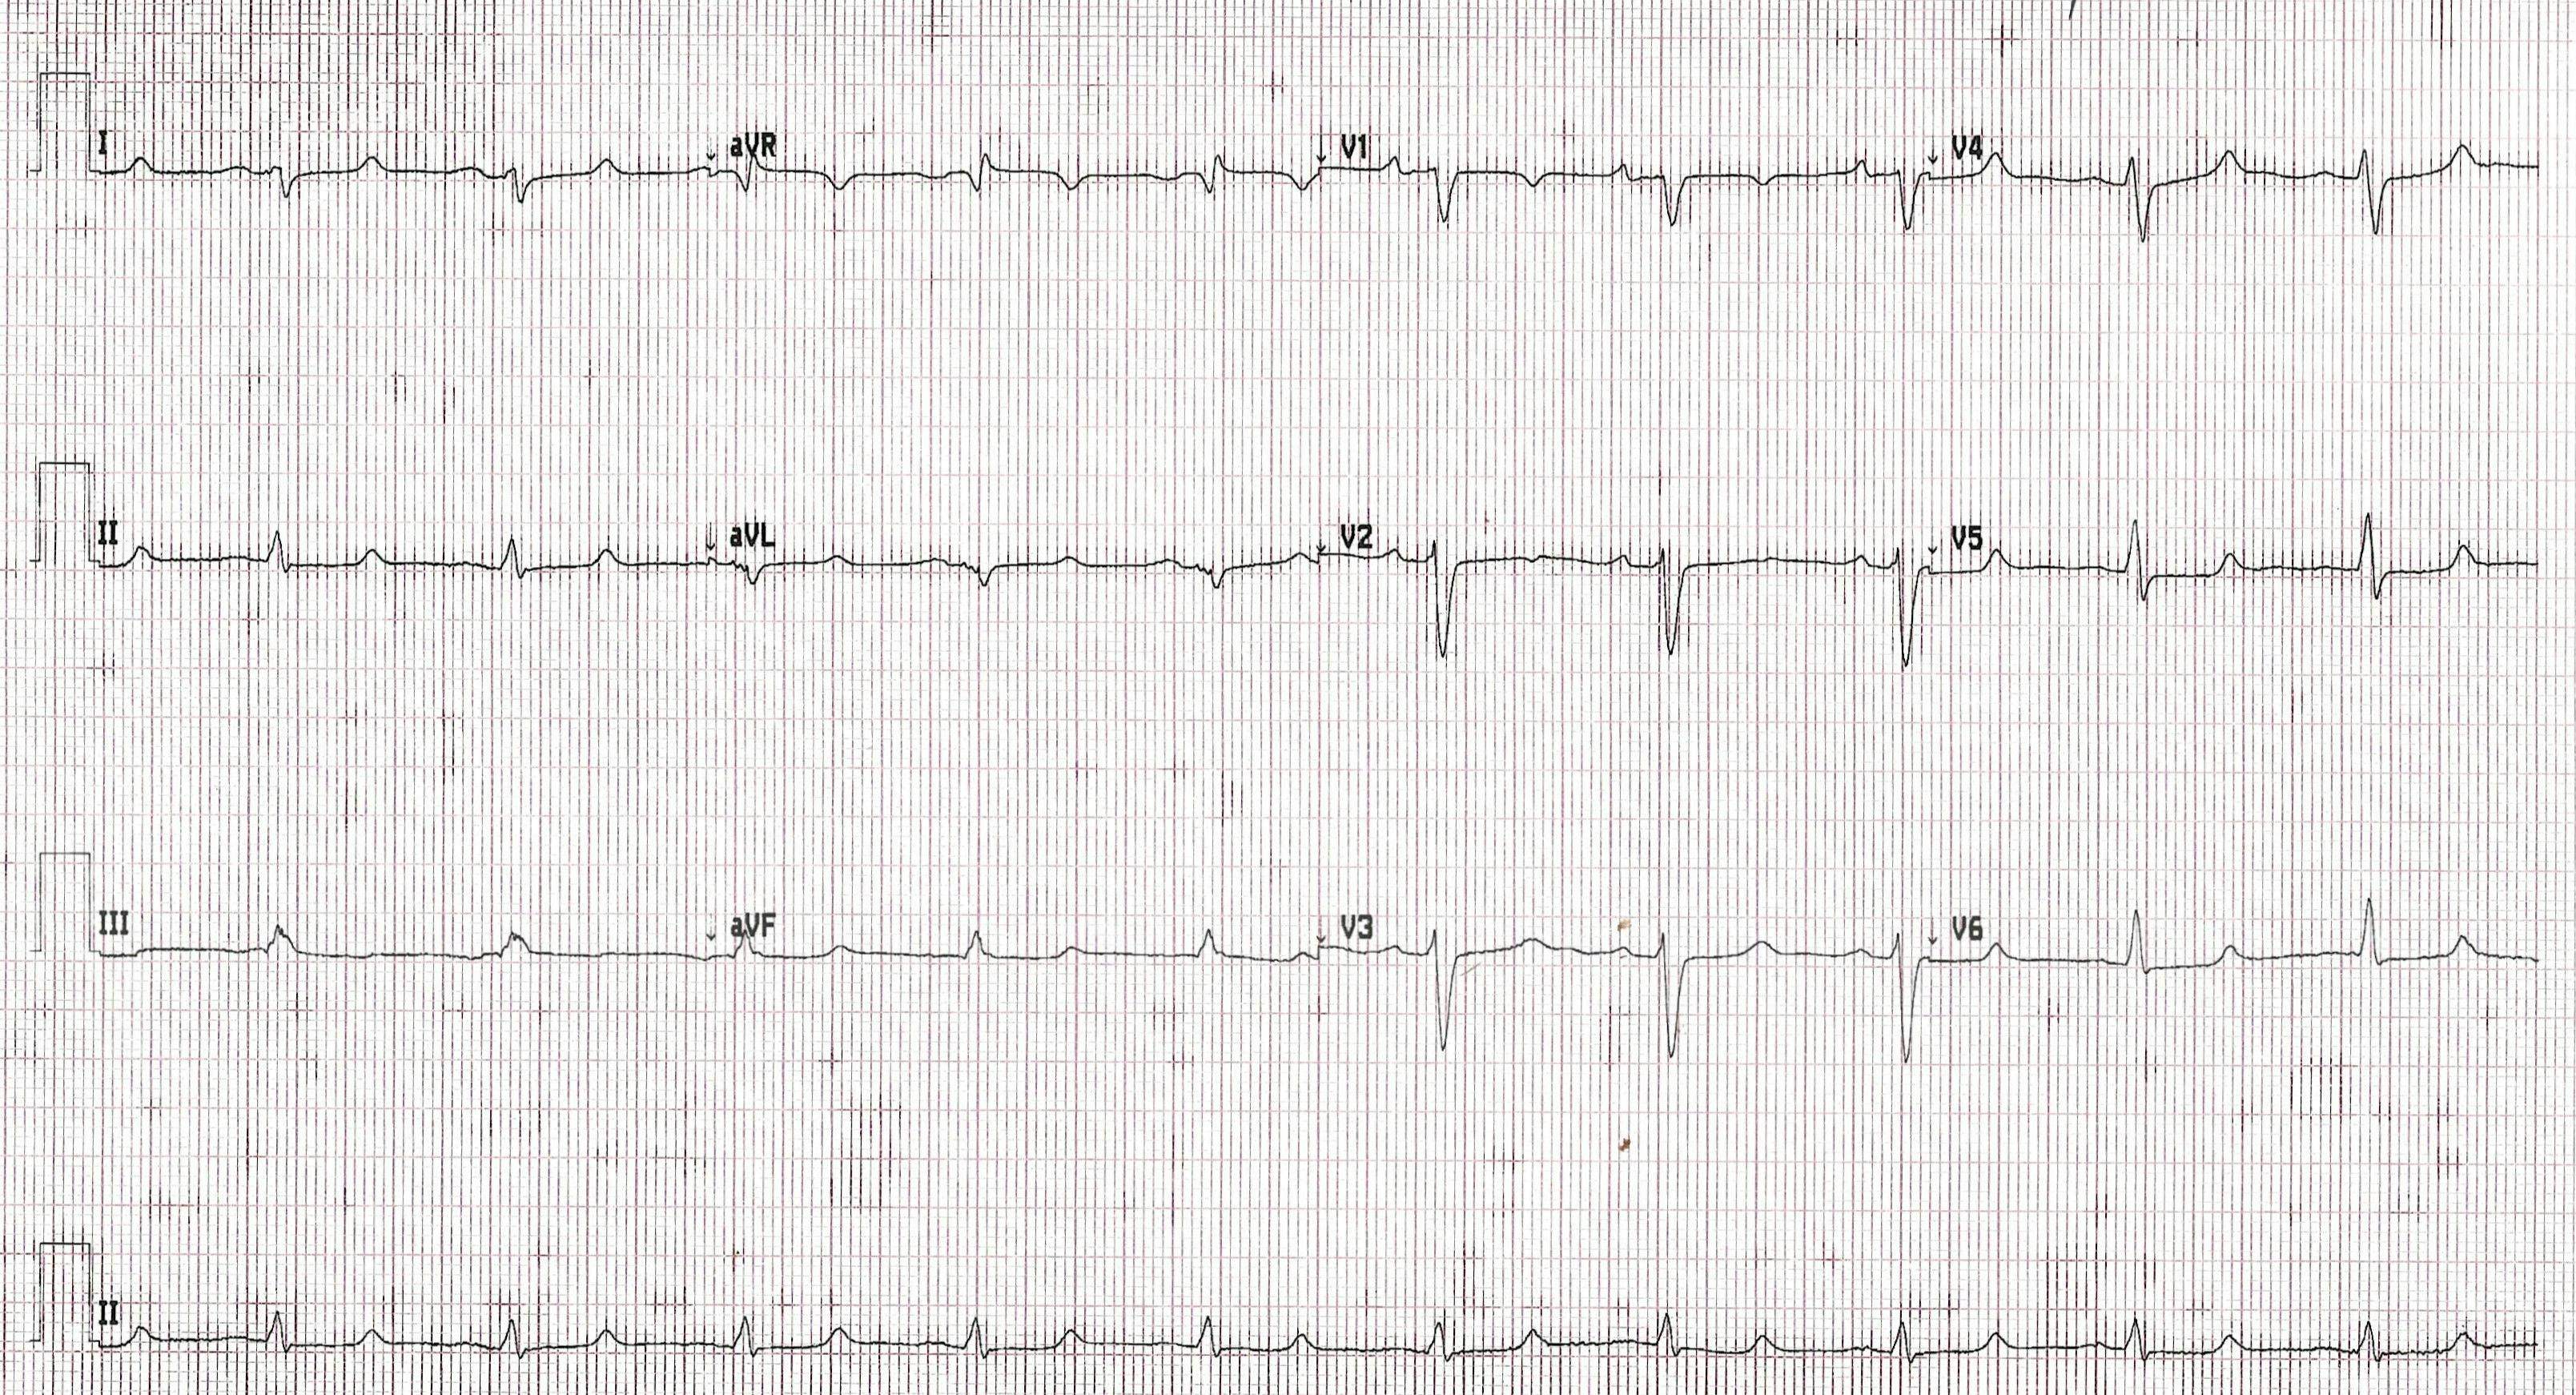 Computer print out of a patient's ECG. | Credit: Brady Pregerson, MD